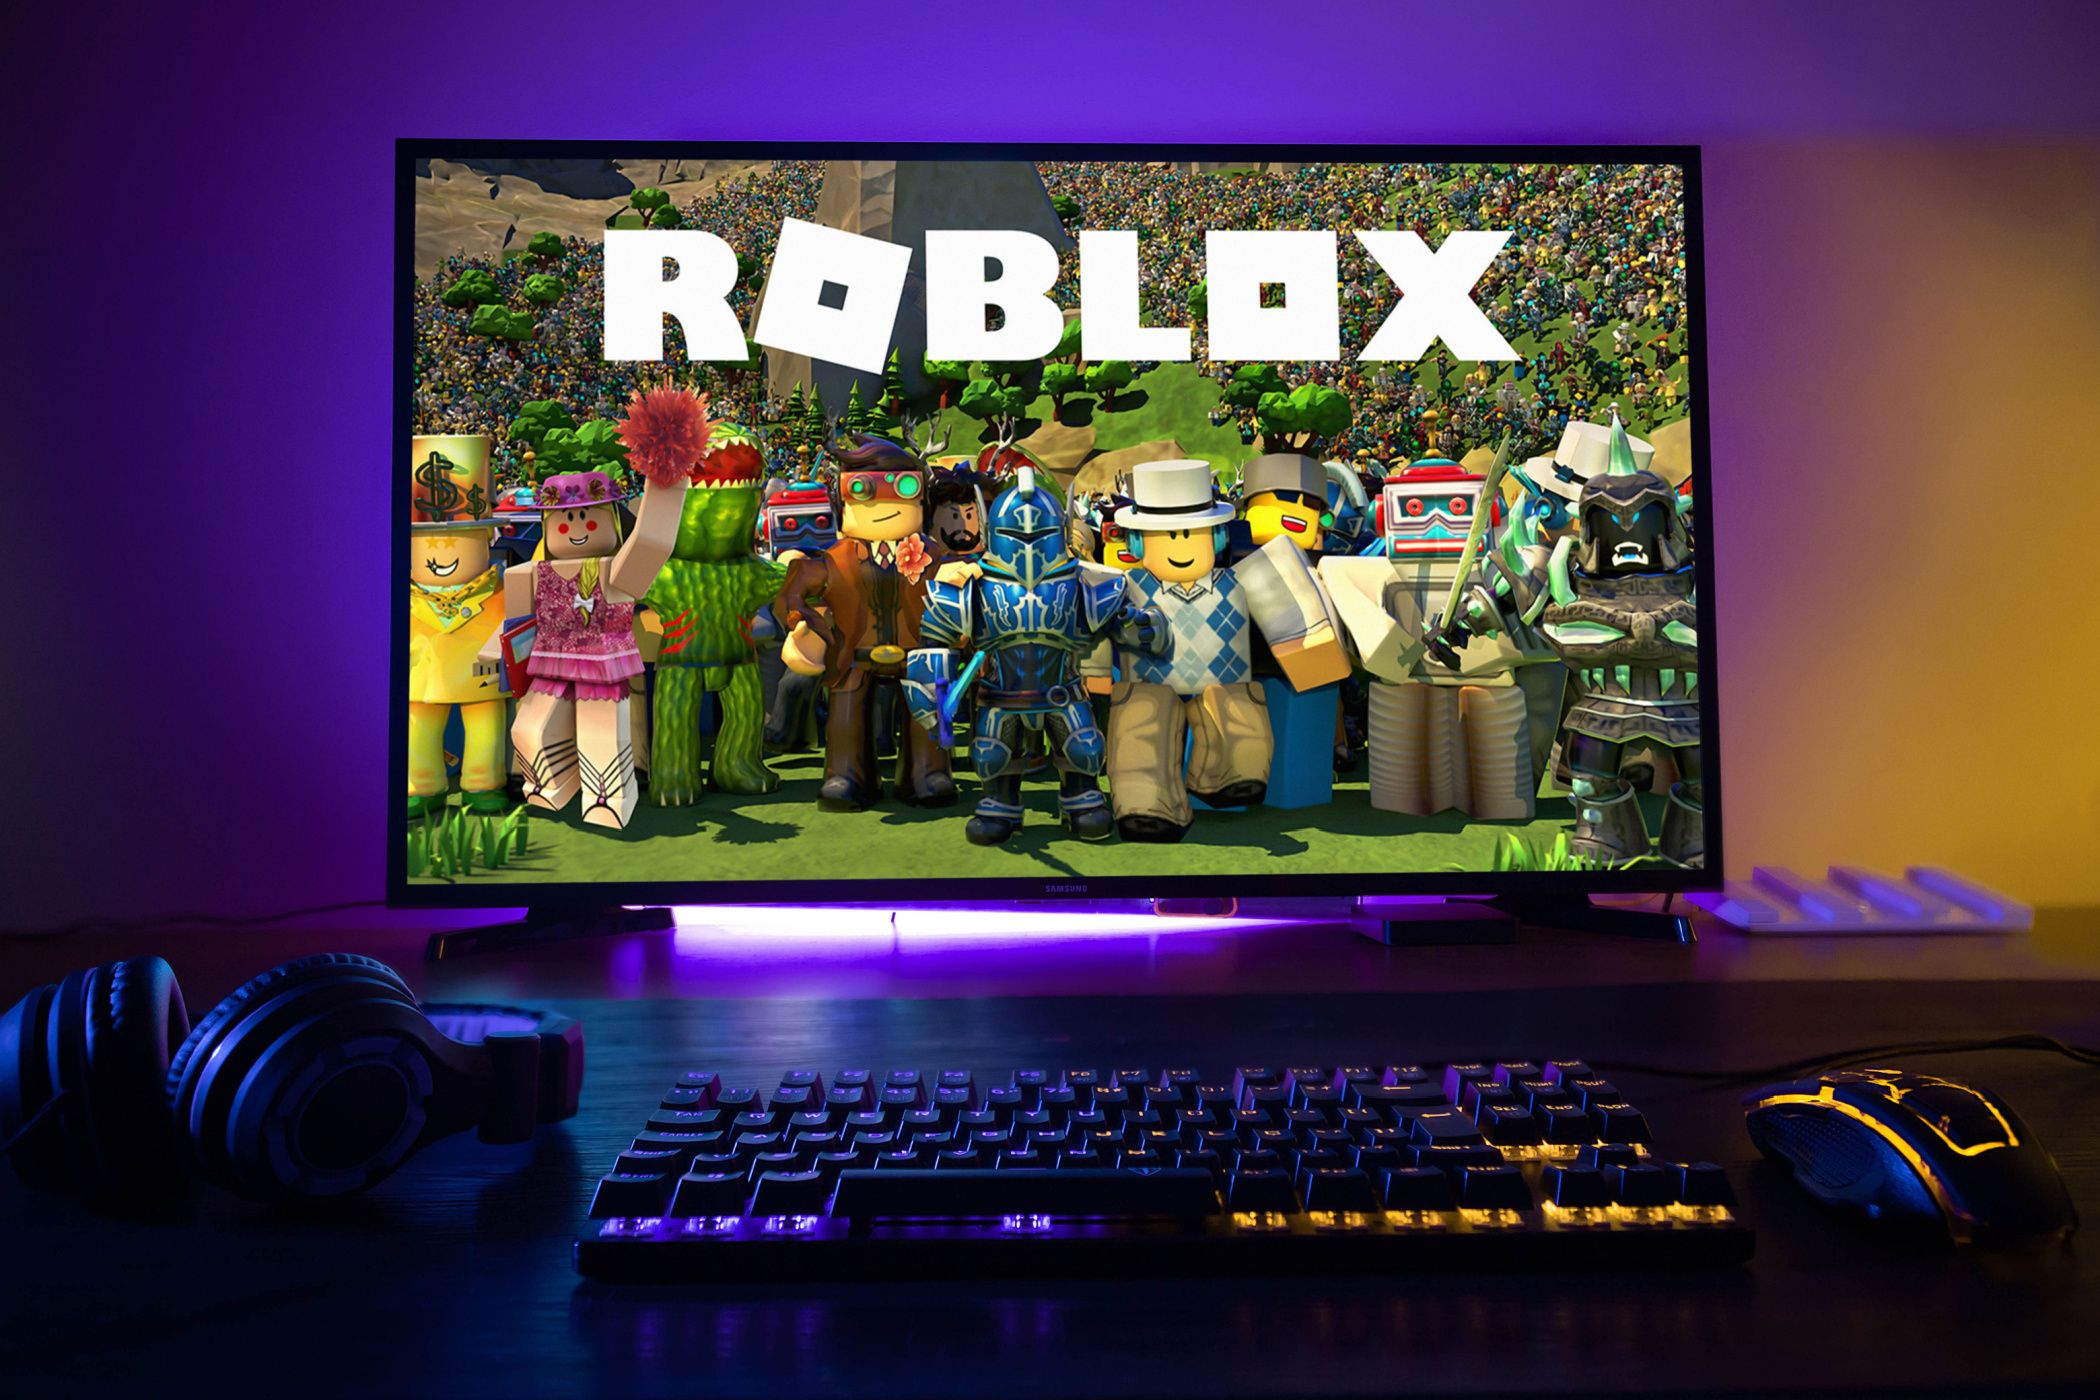 Roblox visible on a PC screen with LED backlight, keyboard, and mouse.